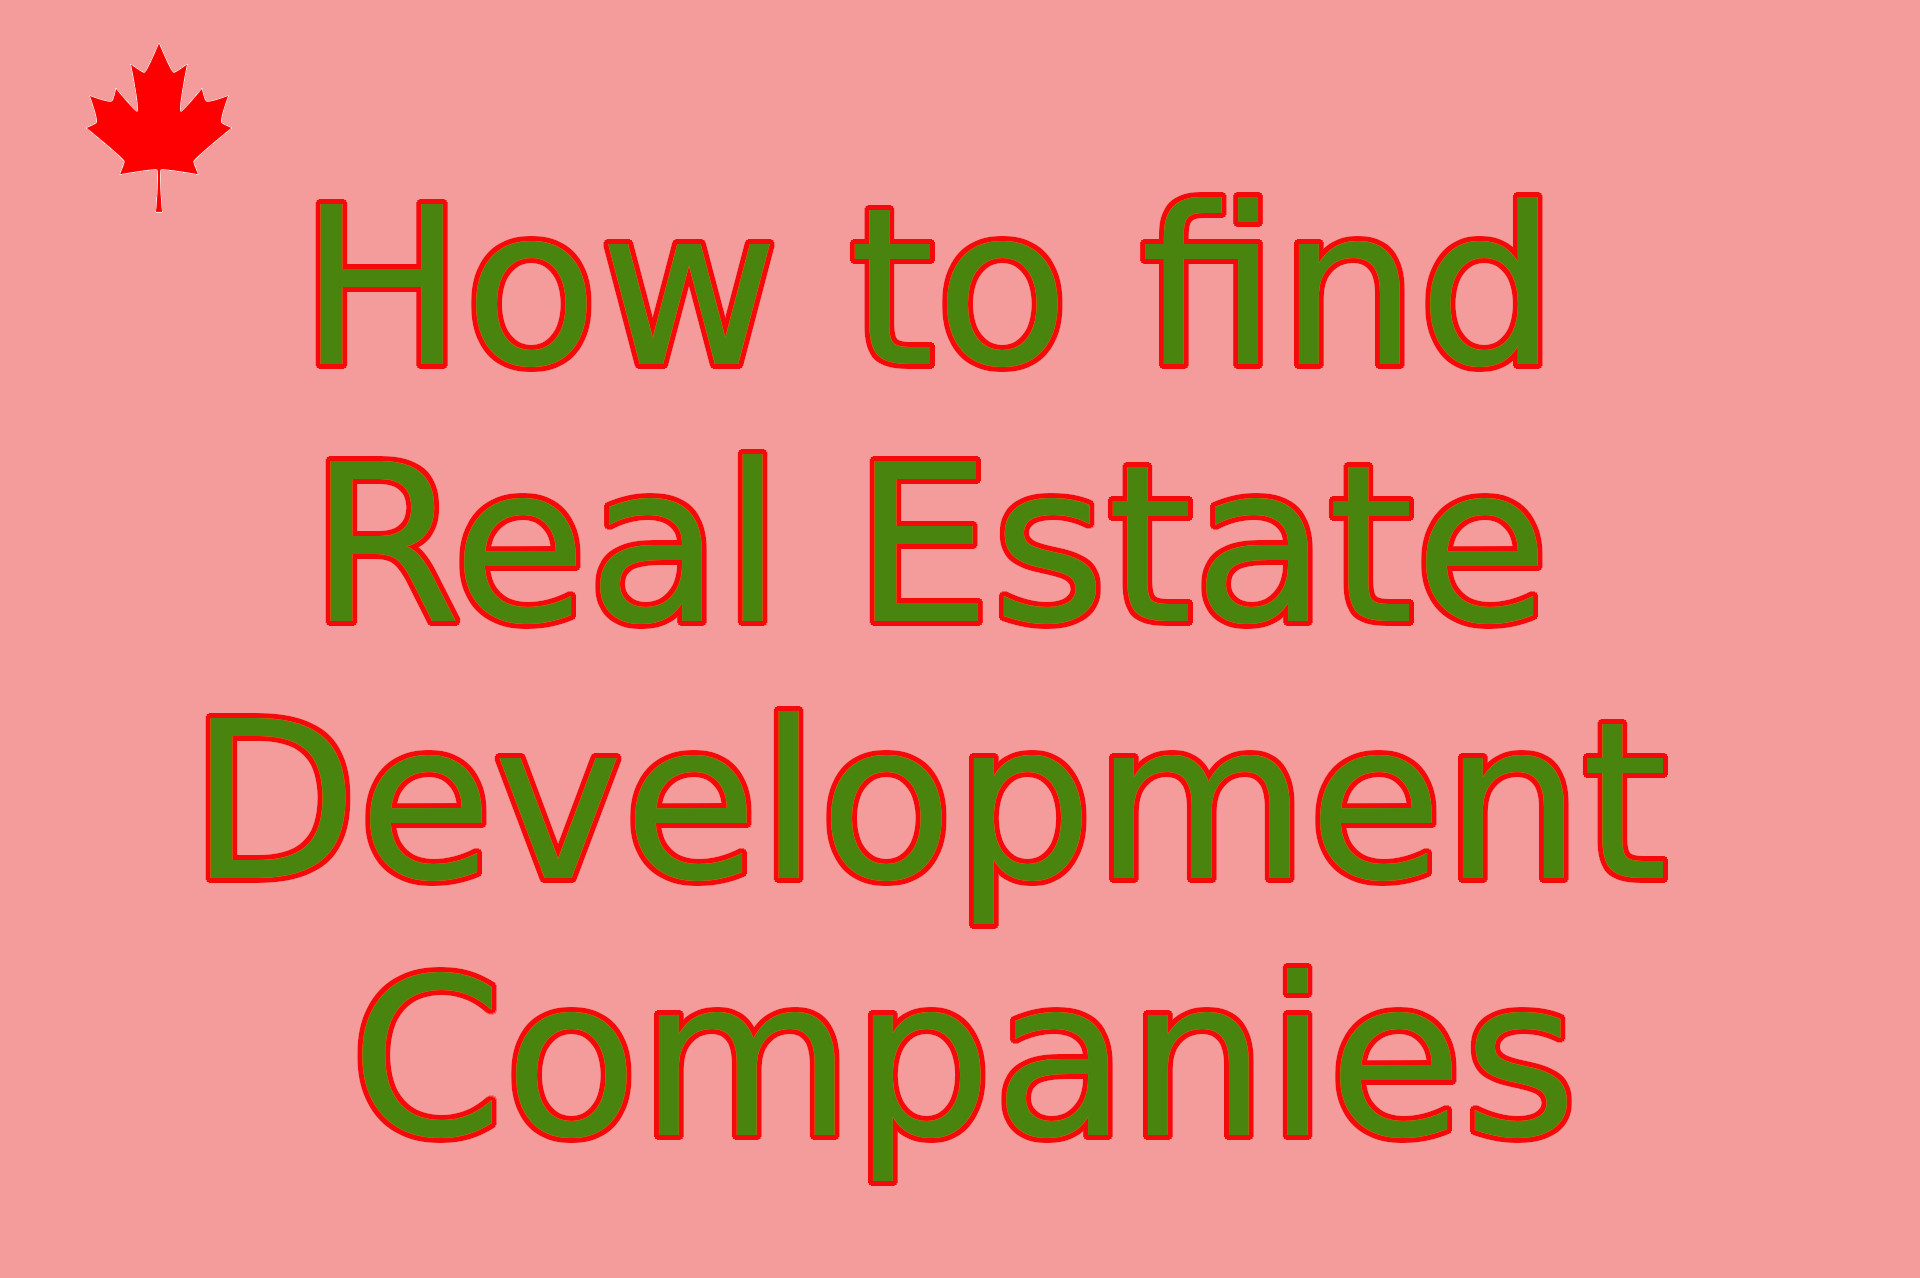 How to find Real Estate Development Companies